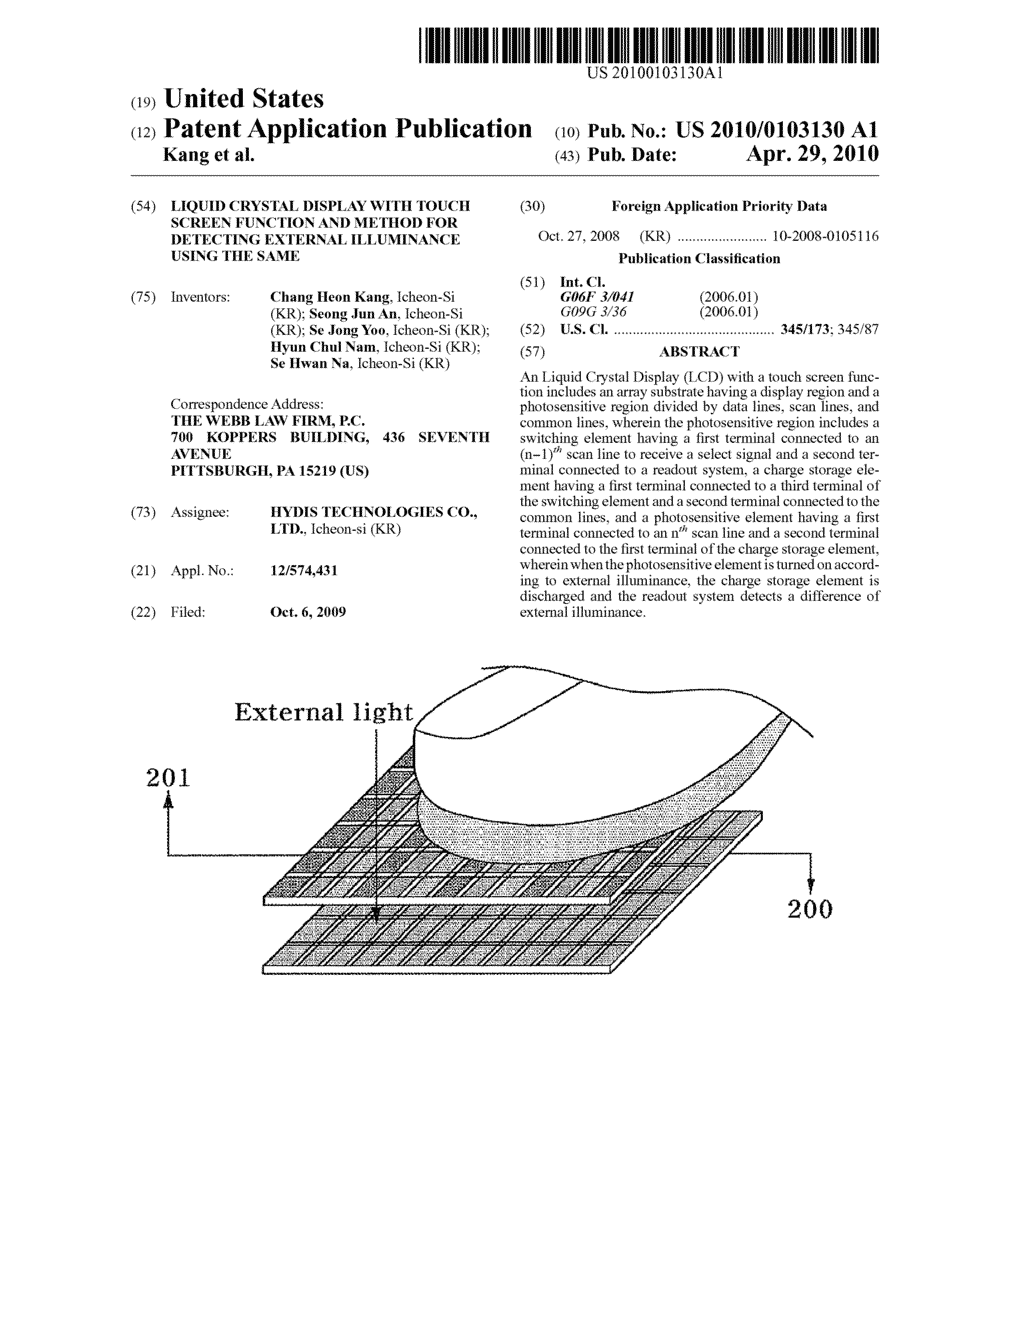 Liquid Crystal Display with Touch Screen Function and Method for Detecting External Illuminance Using the Same - diagram, schematic, and image 01